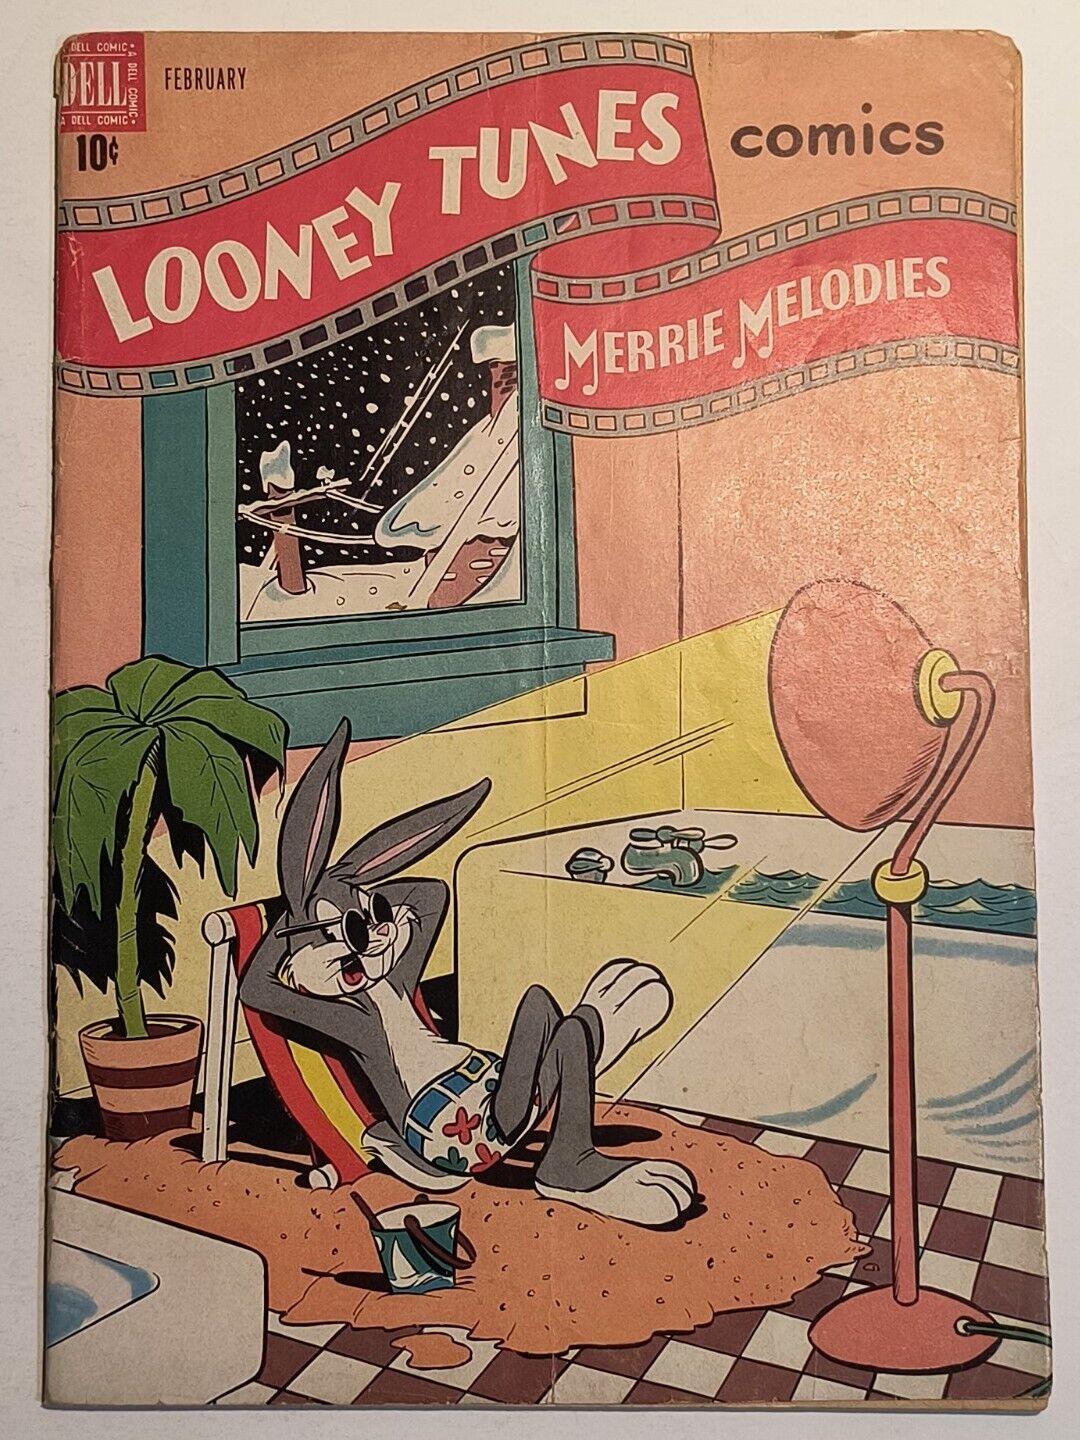 Dell Comics 1949 looney tunes merrie melodies 88 Good 4.0 condition Warner Bros.